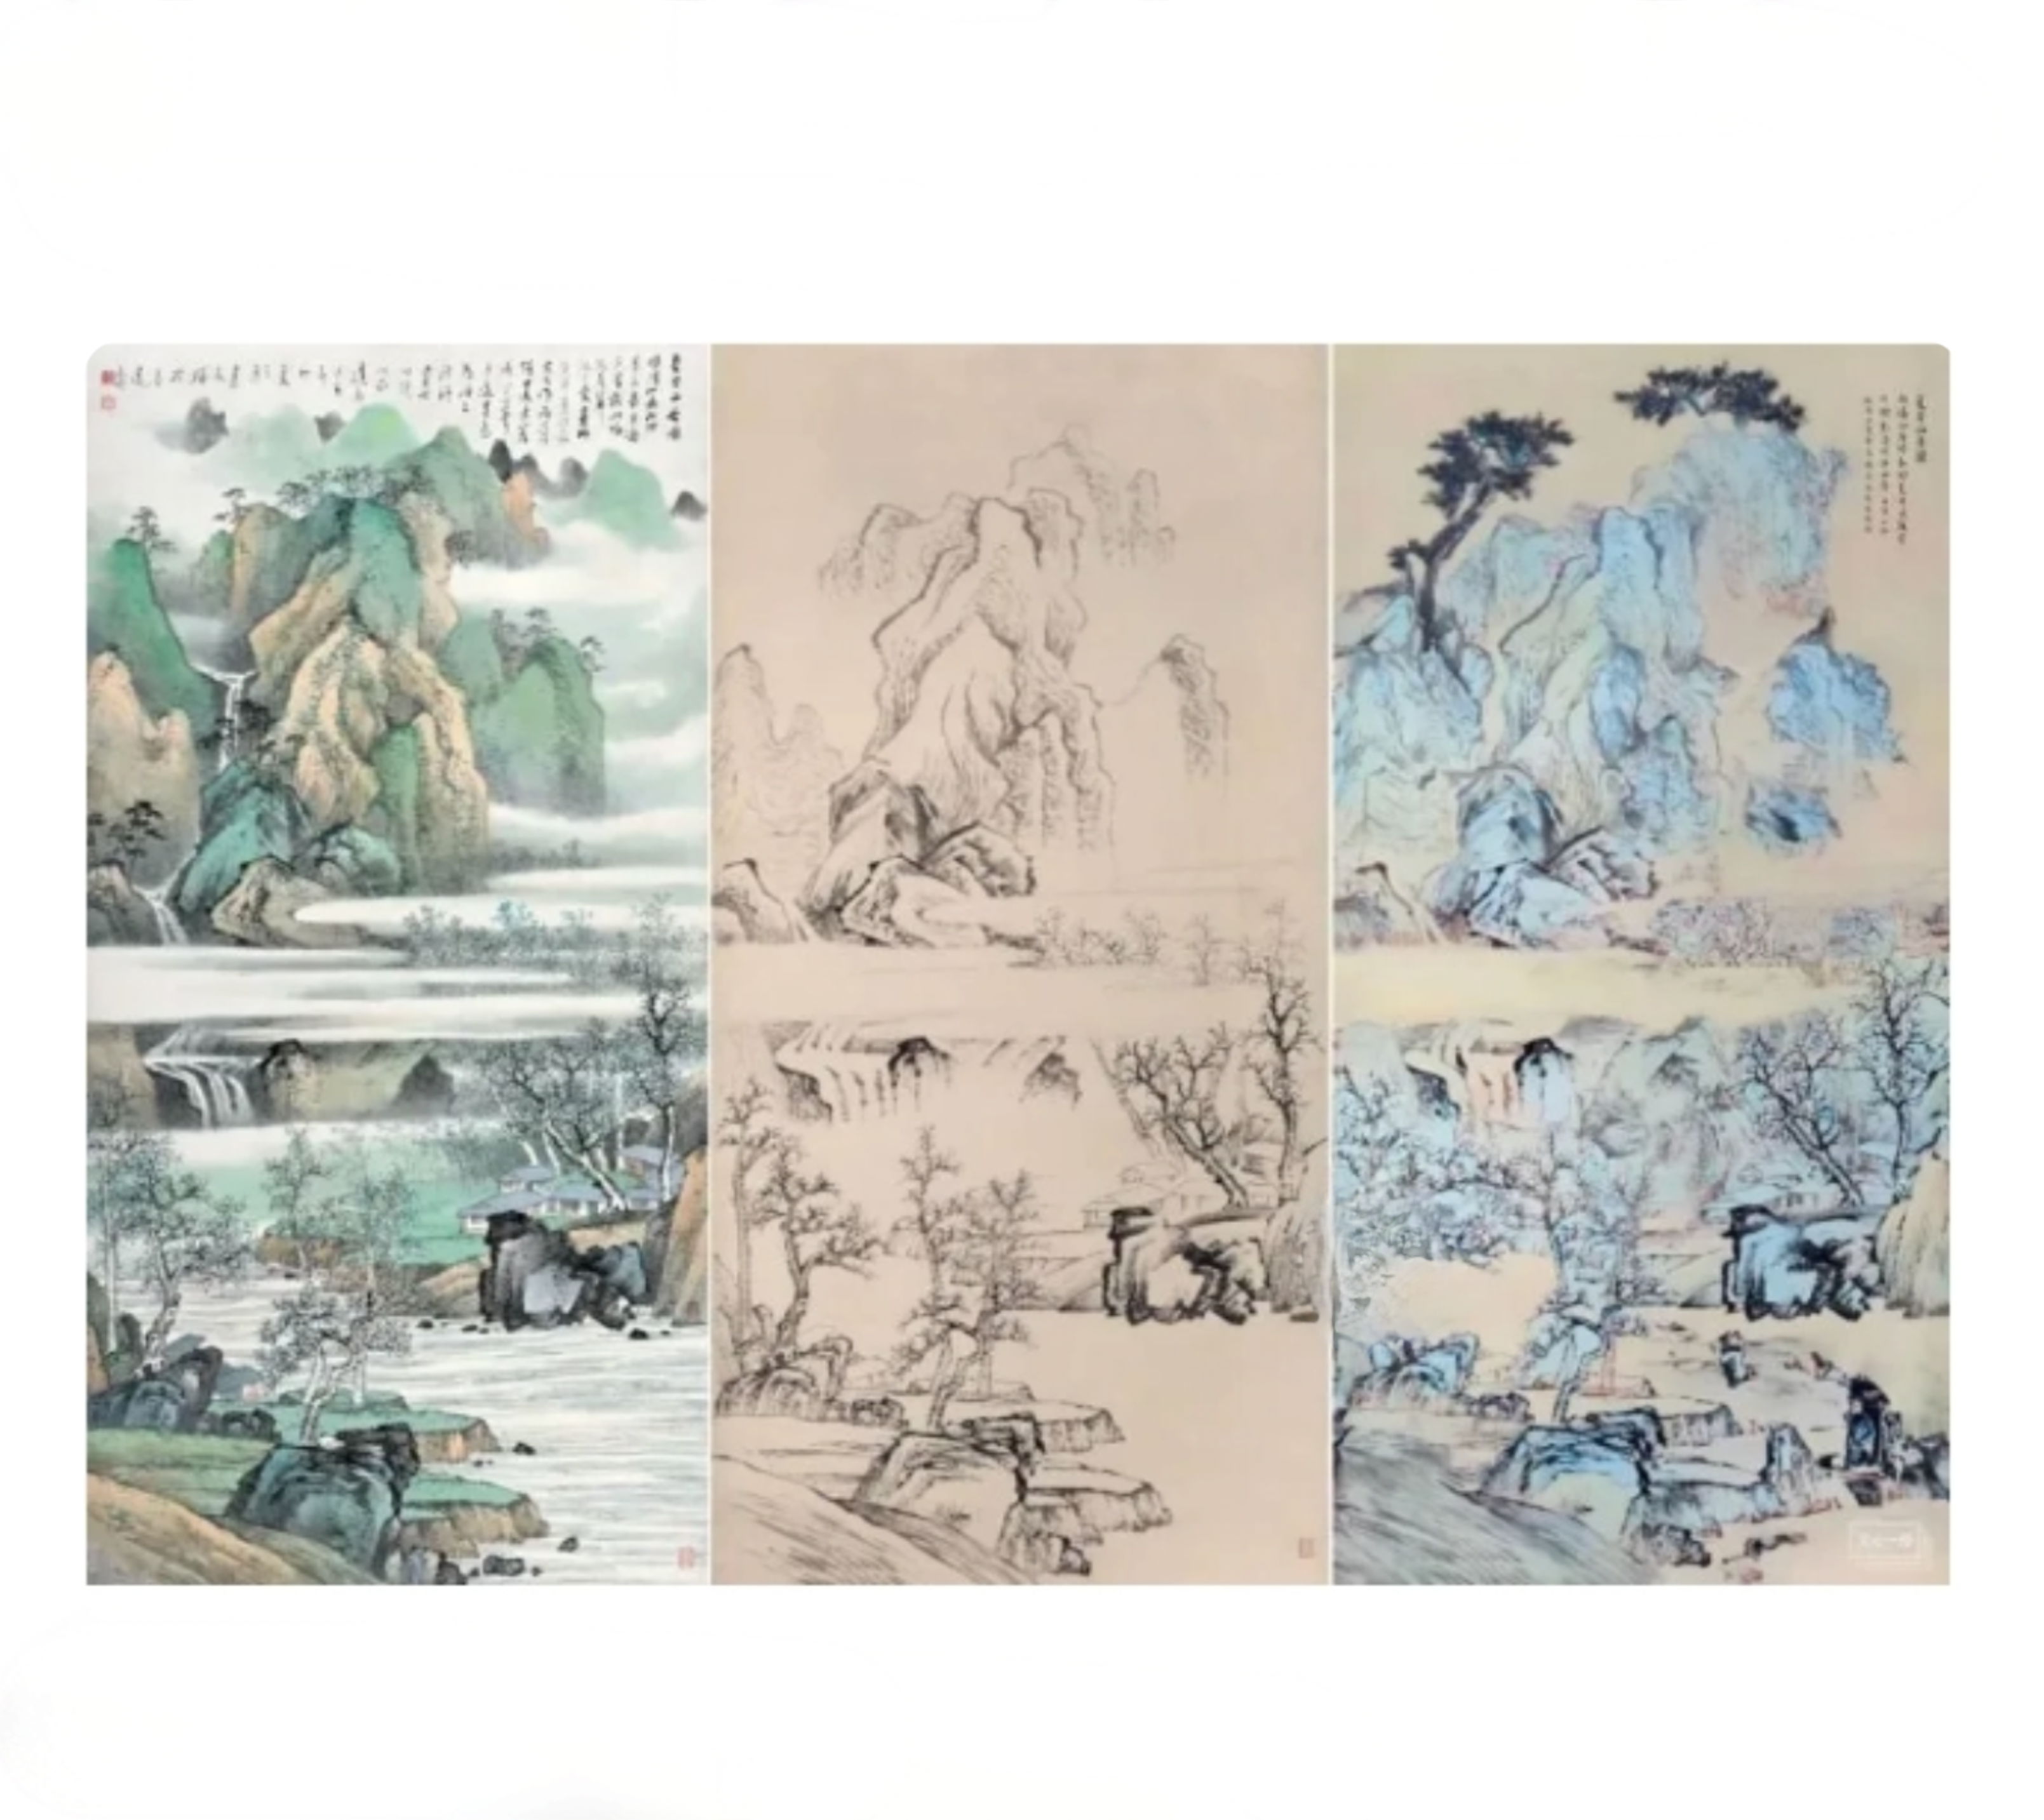 Unfinished Chinese landscape painting completed by AI auctioned for 1.1 million CN¥ (150,000 €)